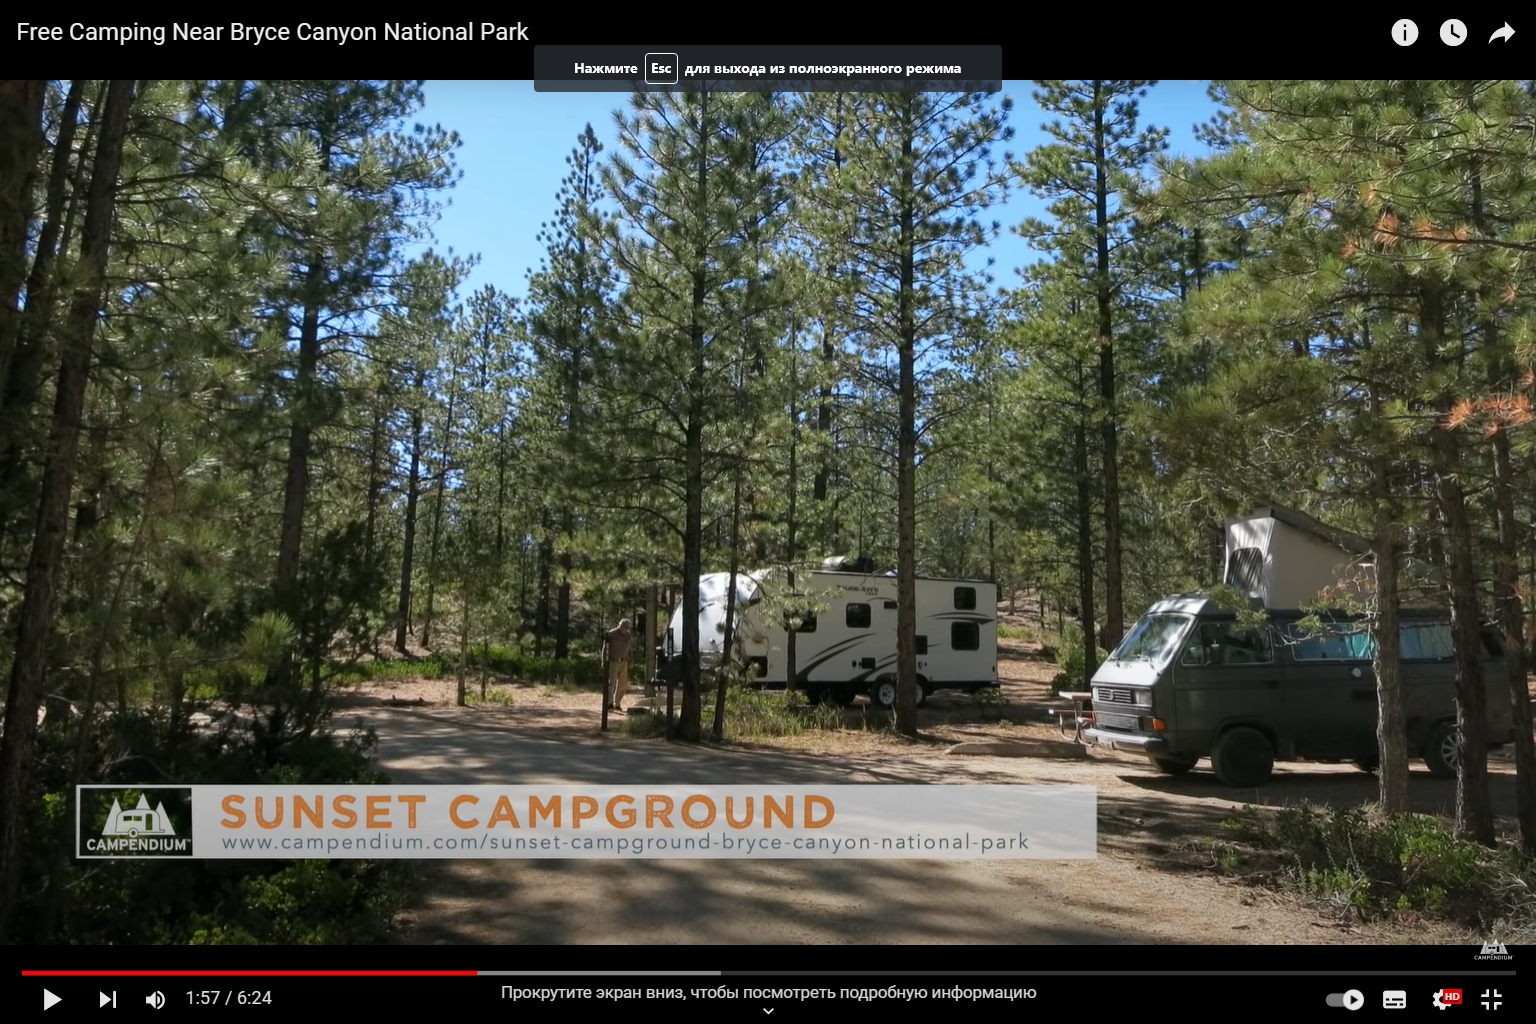 Sunset Campground, several trailers on wheels are parked nearby